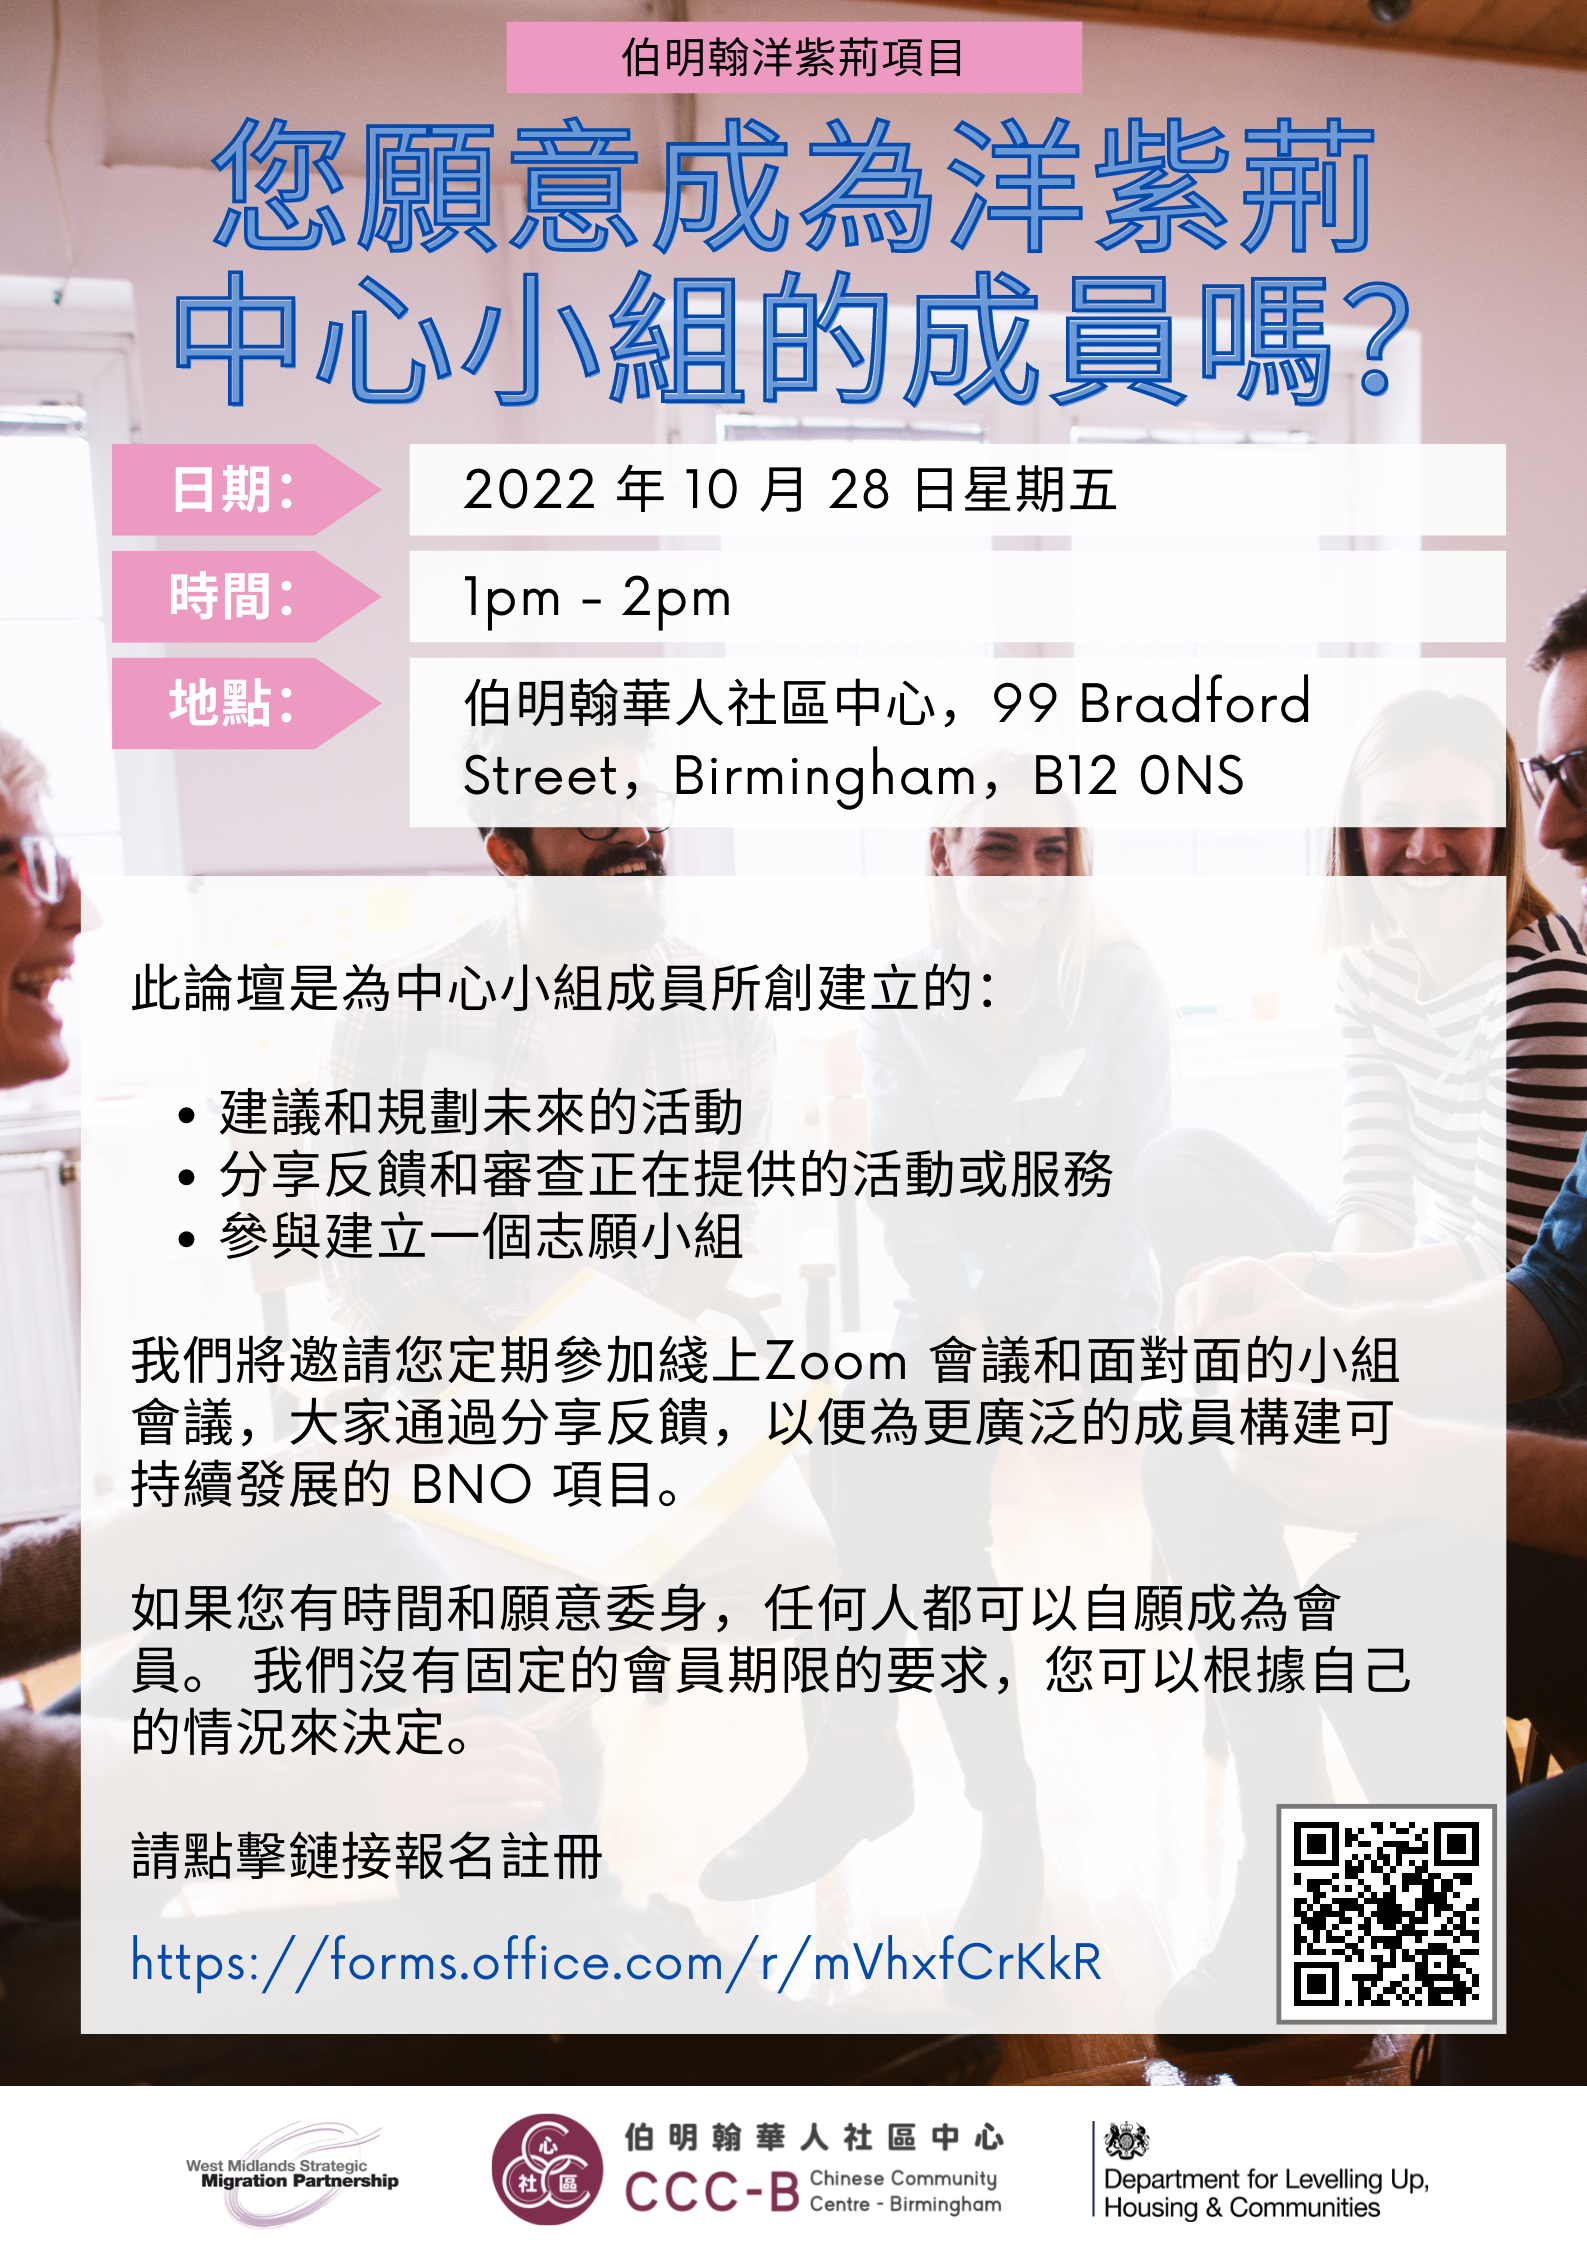 Can You Be a Bauhinia Focus Group Member? – 您願意成為洋紫荊中心小組的成員嗎？